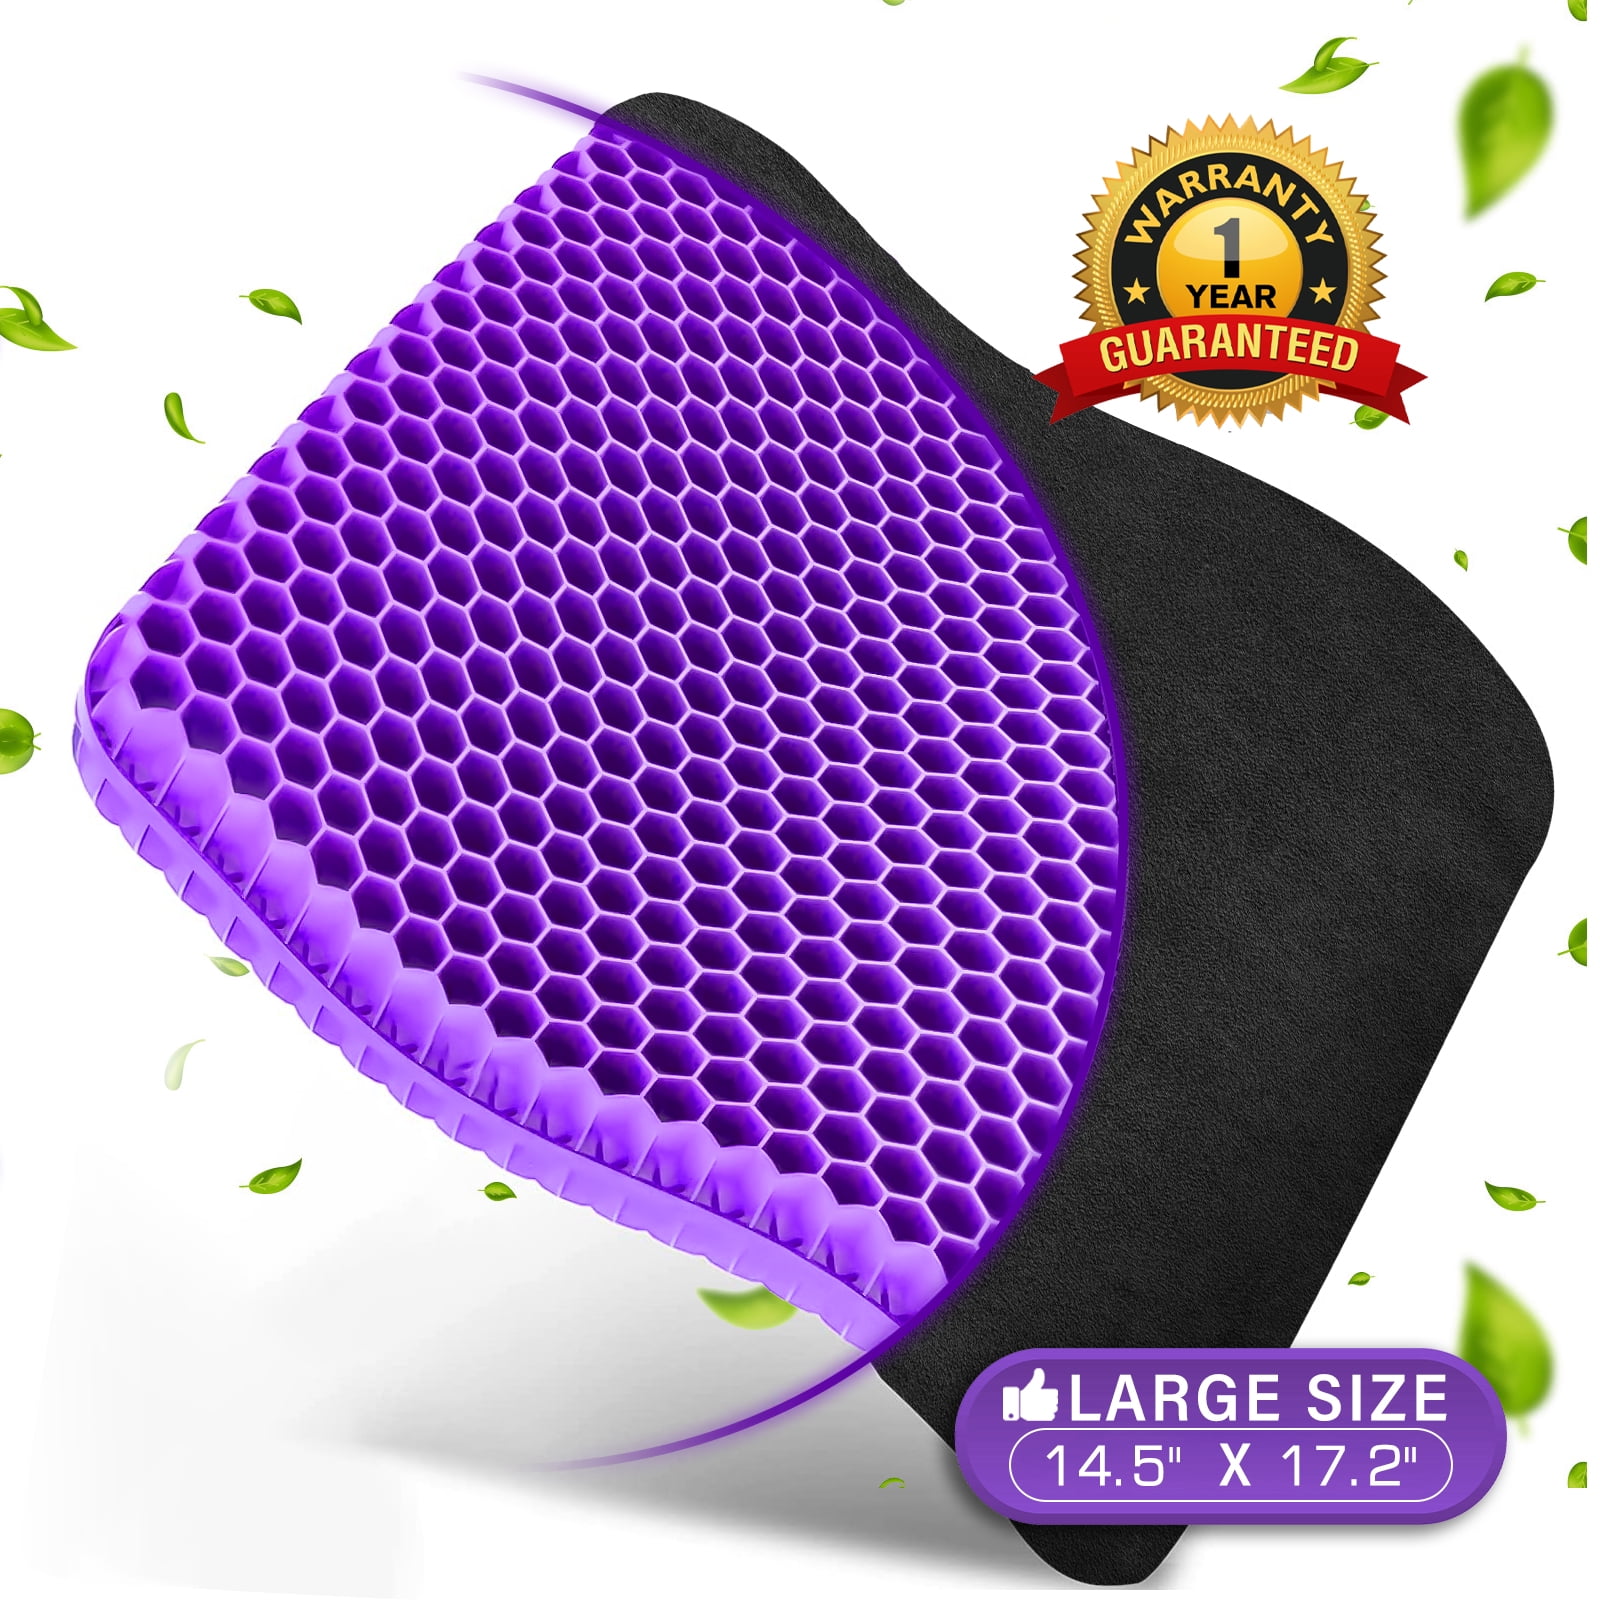 Gel Seat Cushion, Office Seat Cushion Chair Pads for Office, Home, Car,  Wheelchair, Long Trips - Extra Thick Gel Cushion for Pressure Sores,  Tailbone, Back, Sciatica Pain Relief (Extra Thick, Violet) 